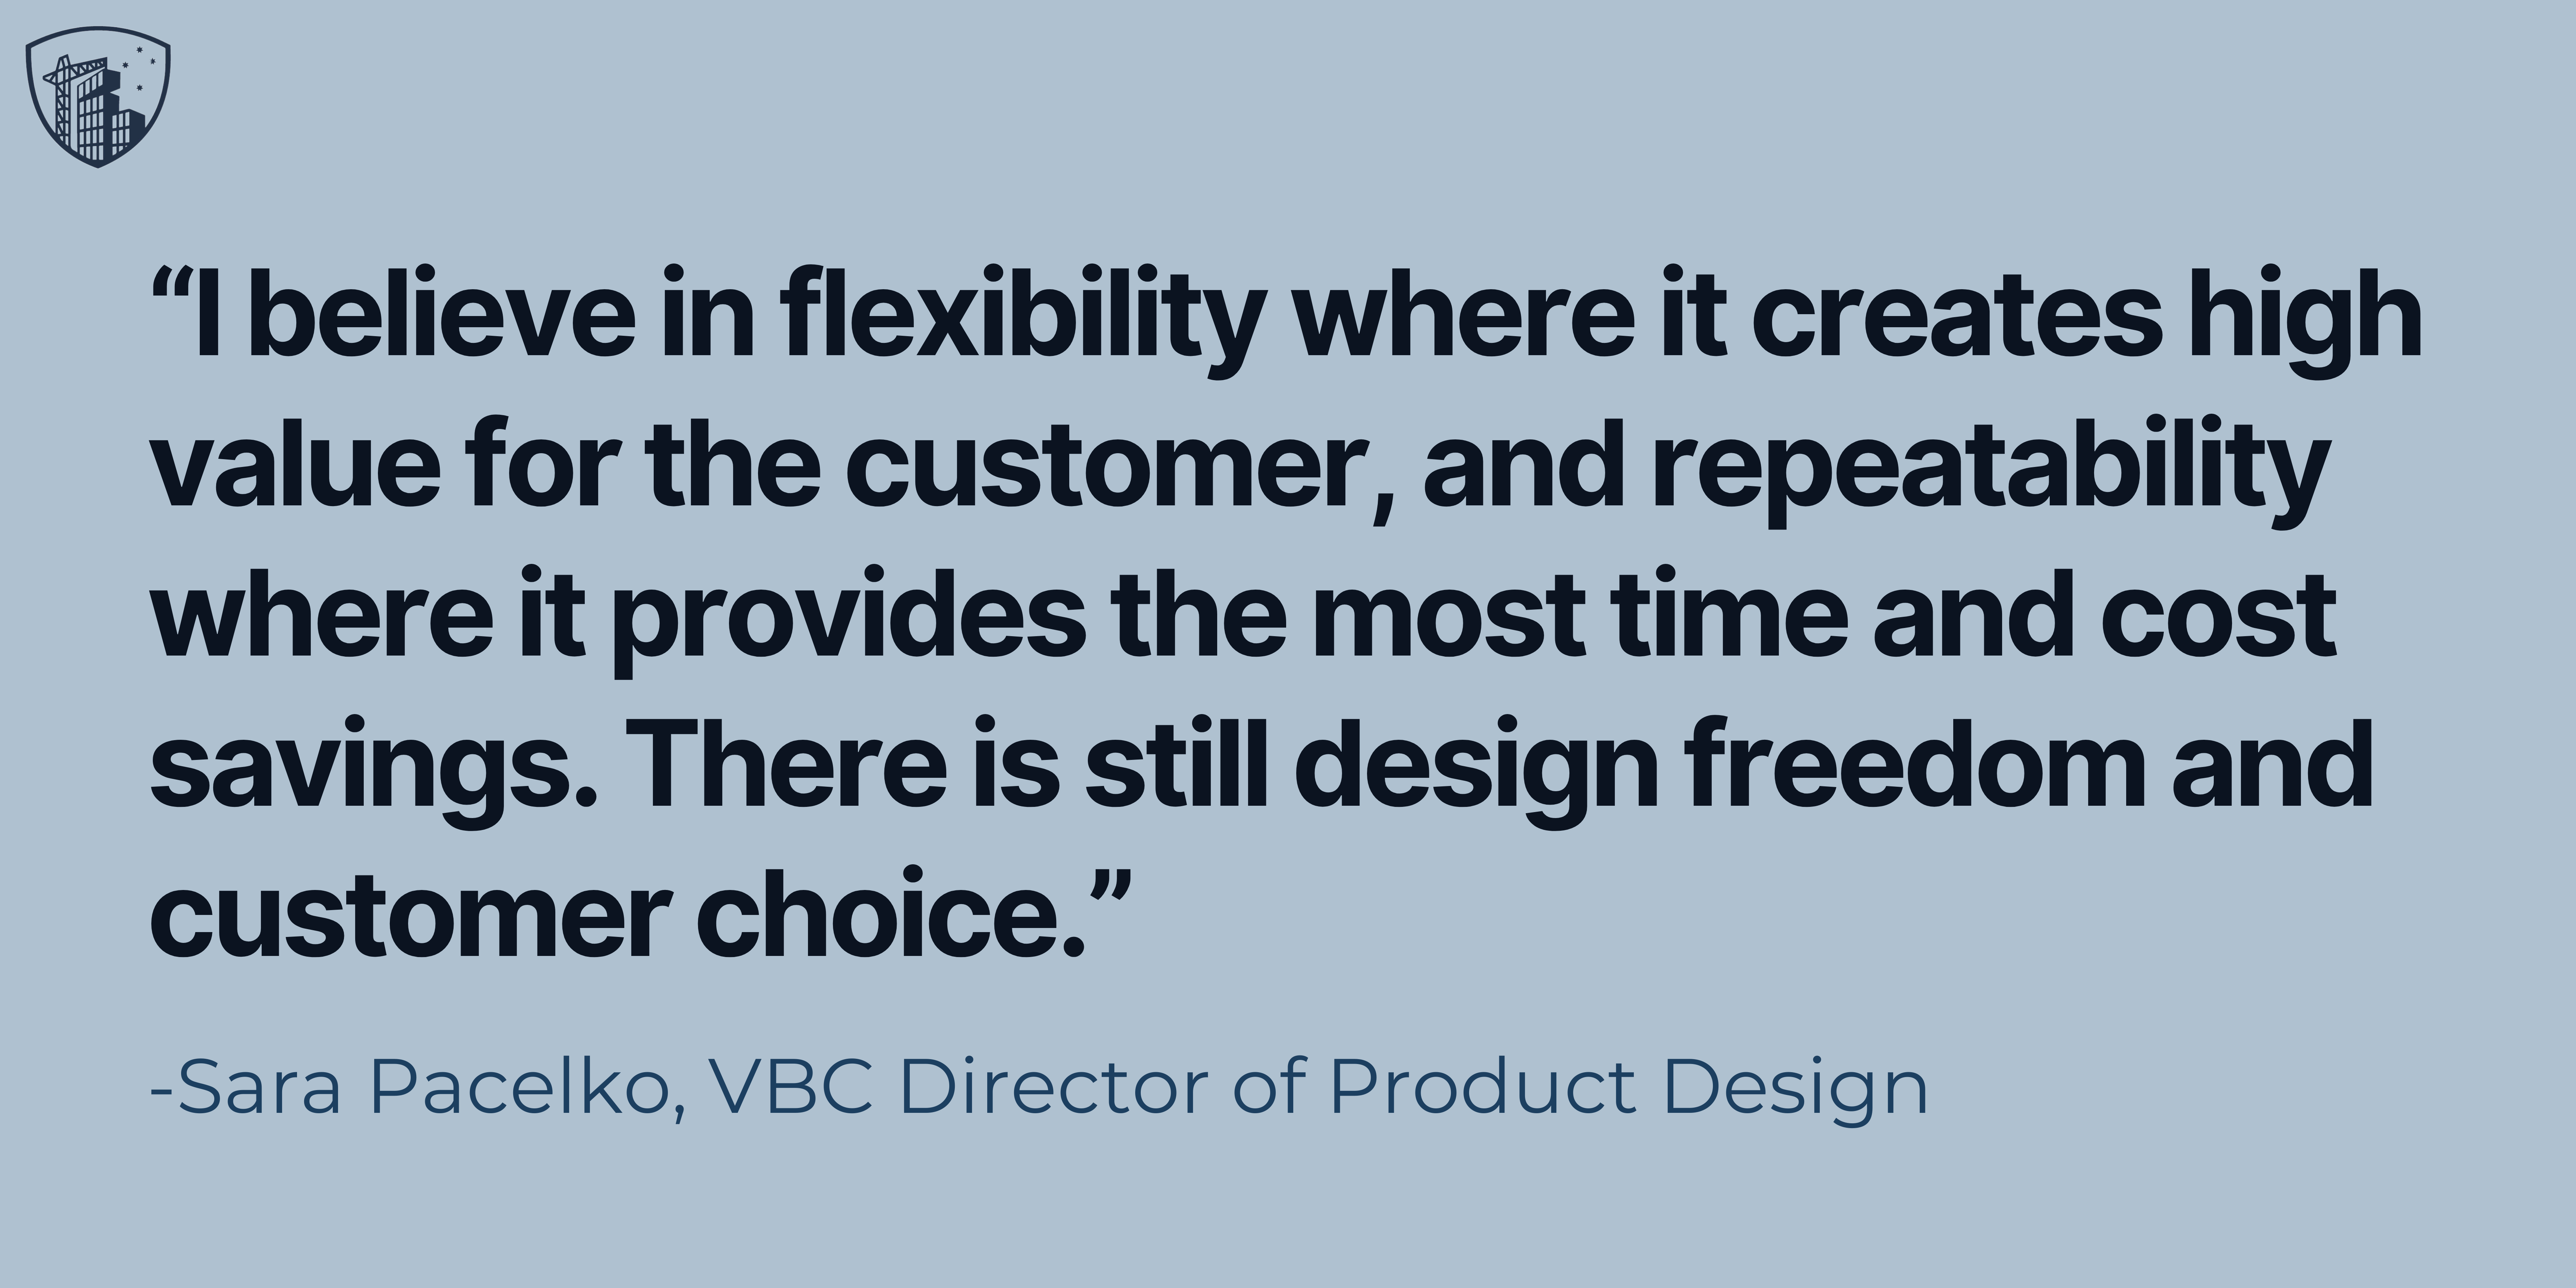 “I believe in flexibility where it creates high value for the customer, and repeatability where it provides the most time and cost savings. There is still design freedom and customer choice” 